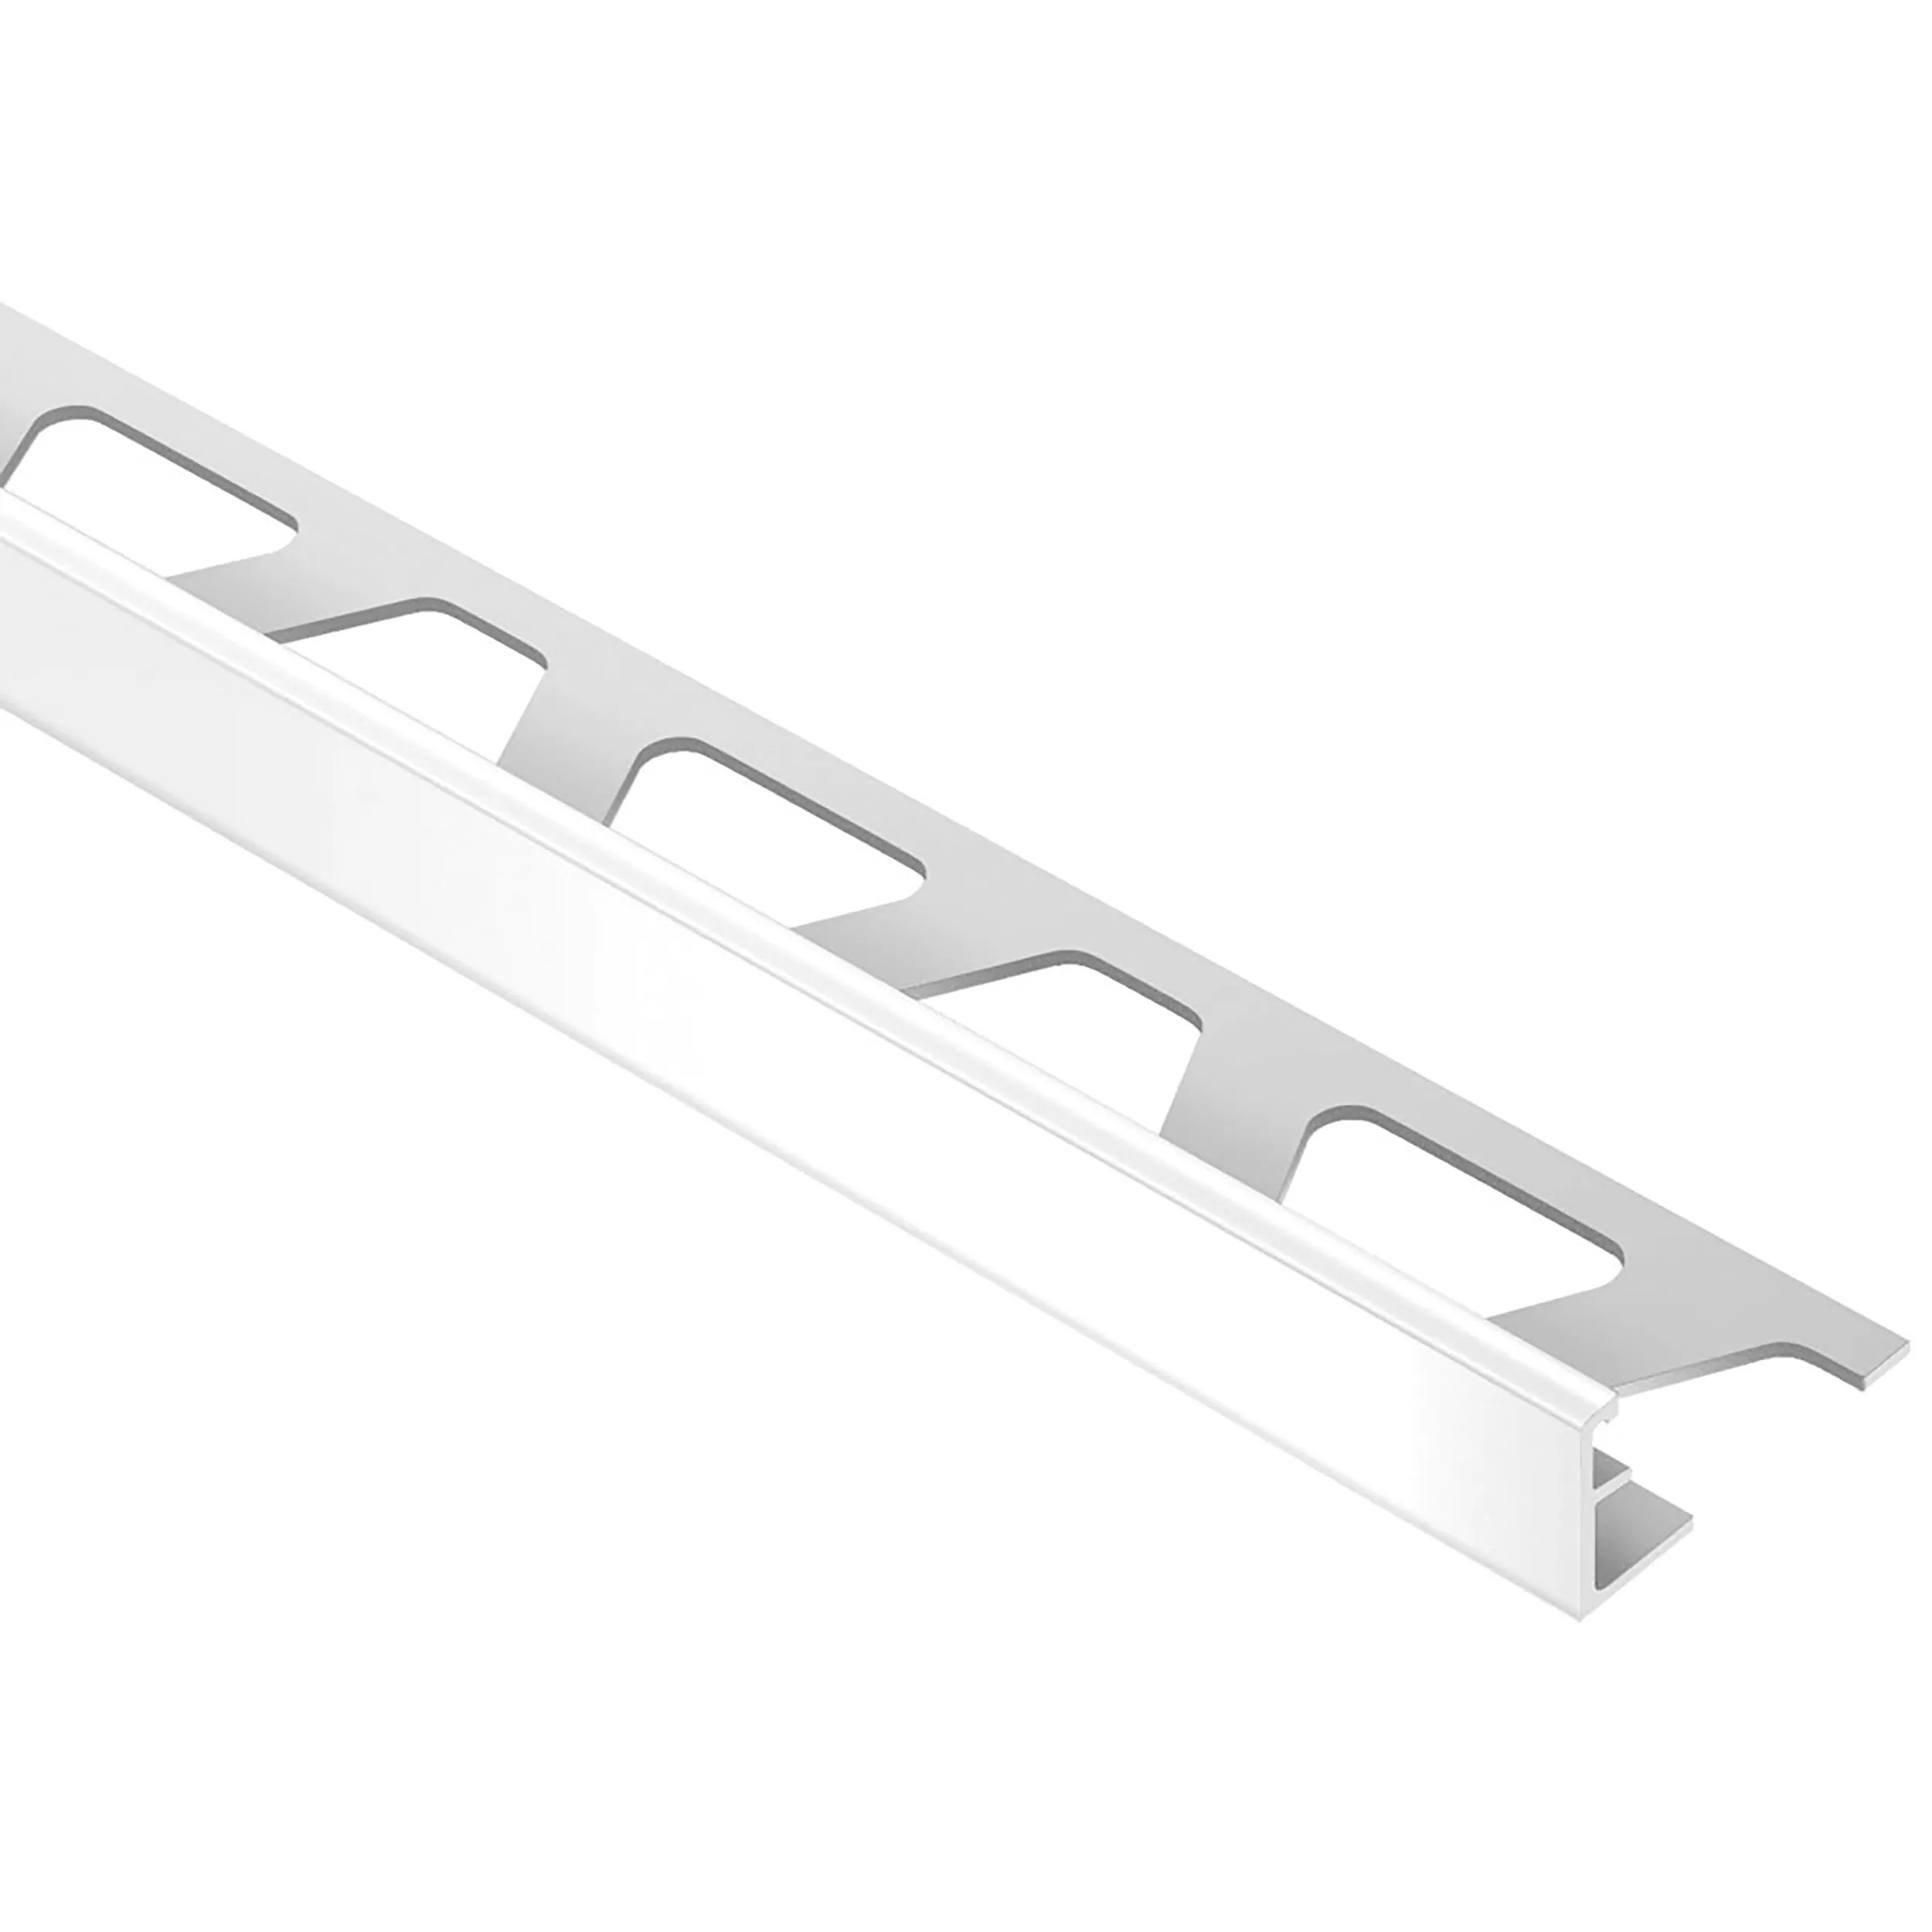 Schluter-Jolly Edge Trim 3/8in. In Bright White Color-Coated Aluminum